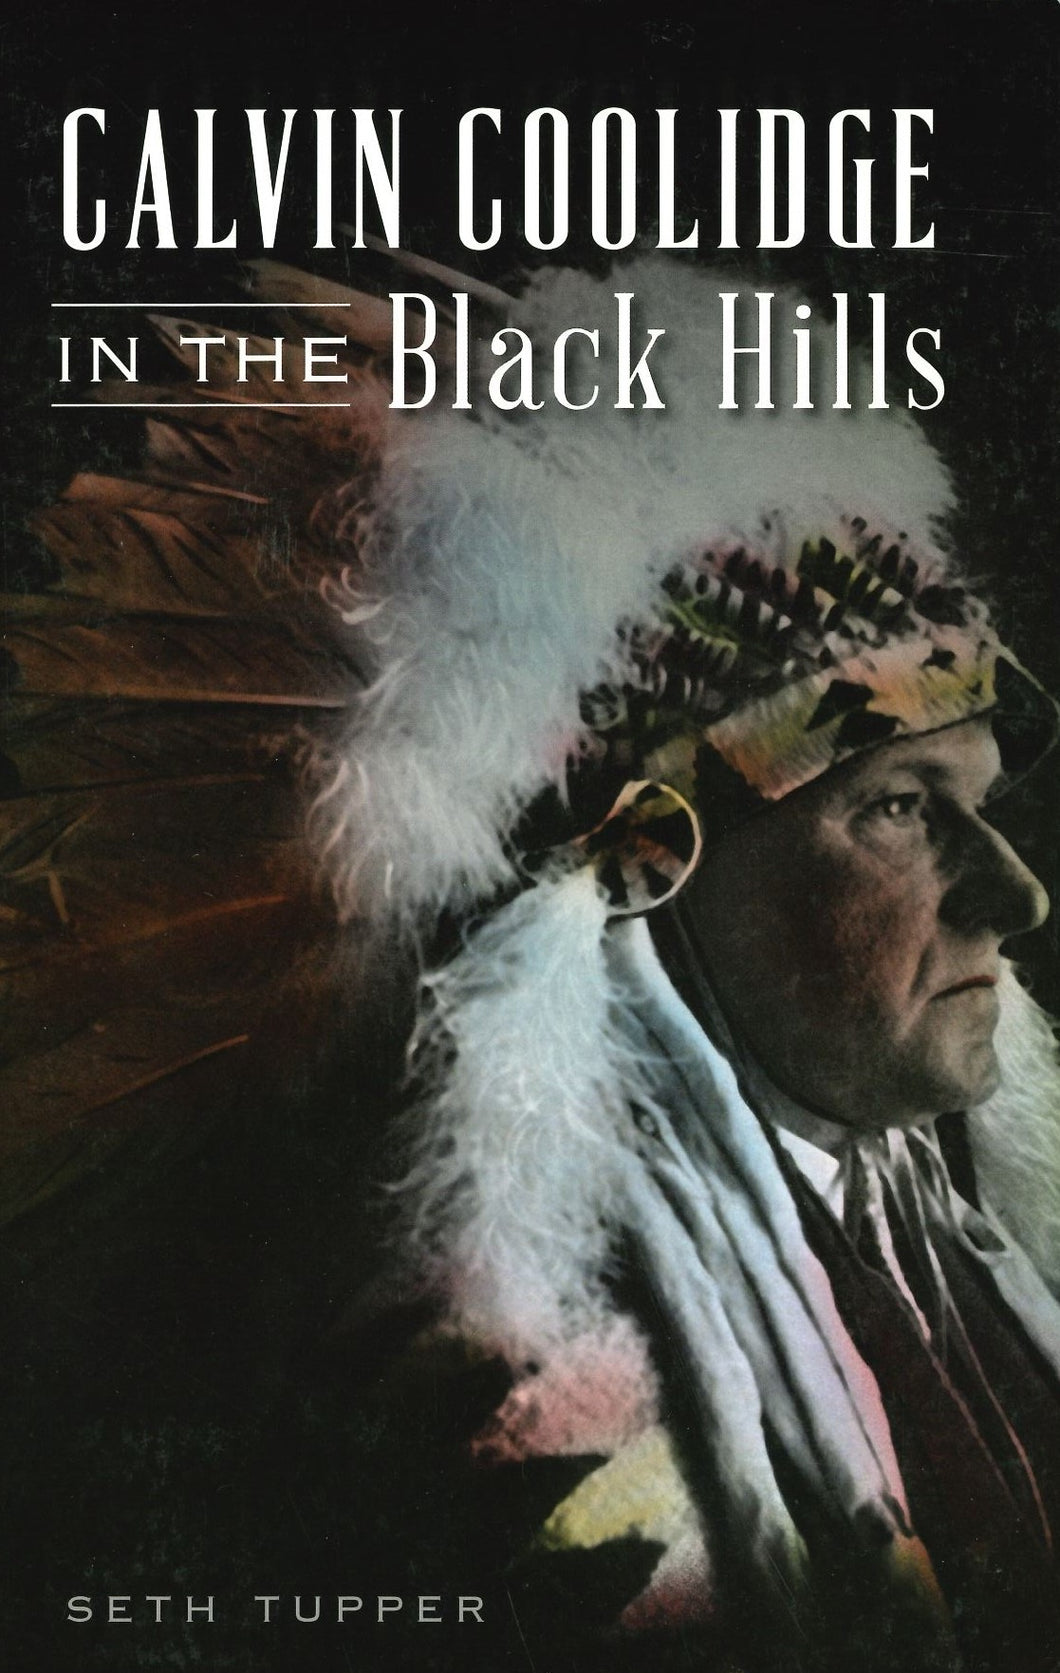 Calvin Coolidge in the Black Hills by Seth Tupper